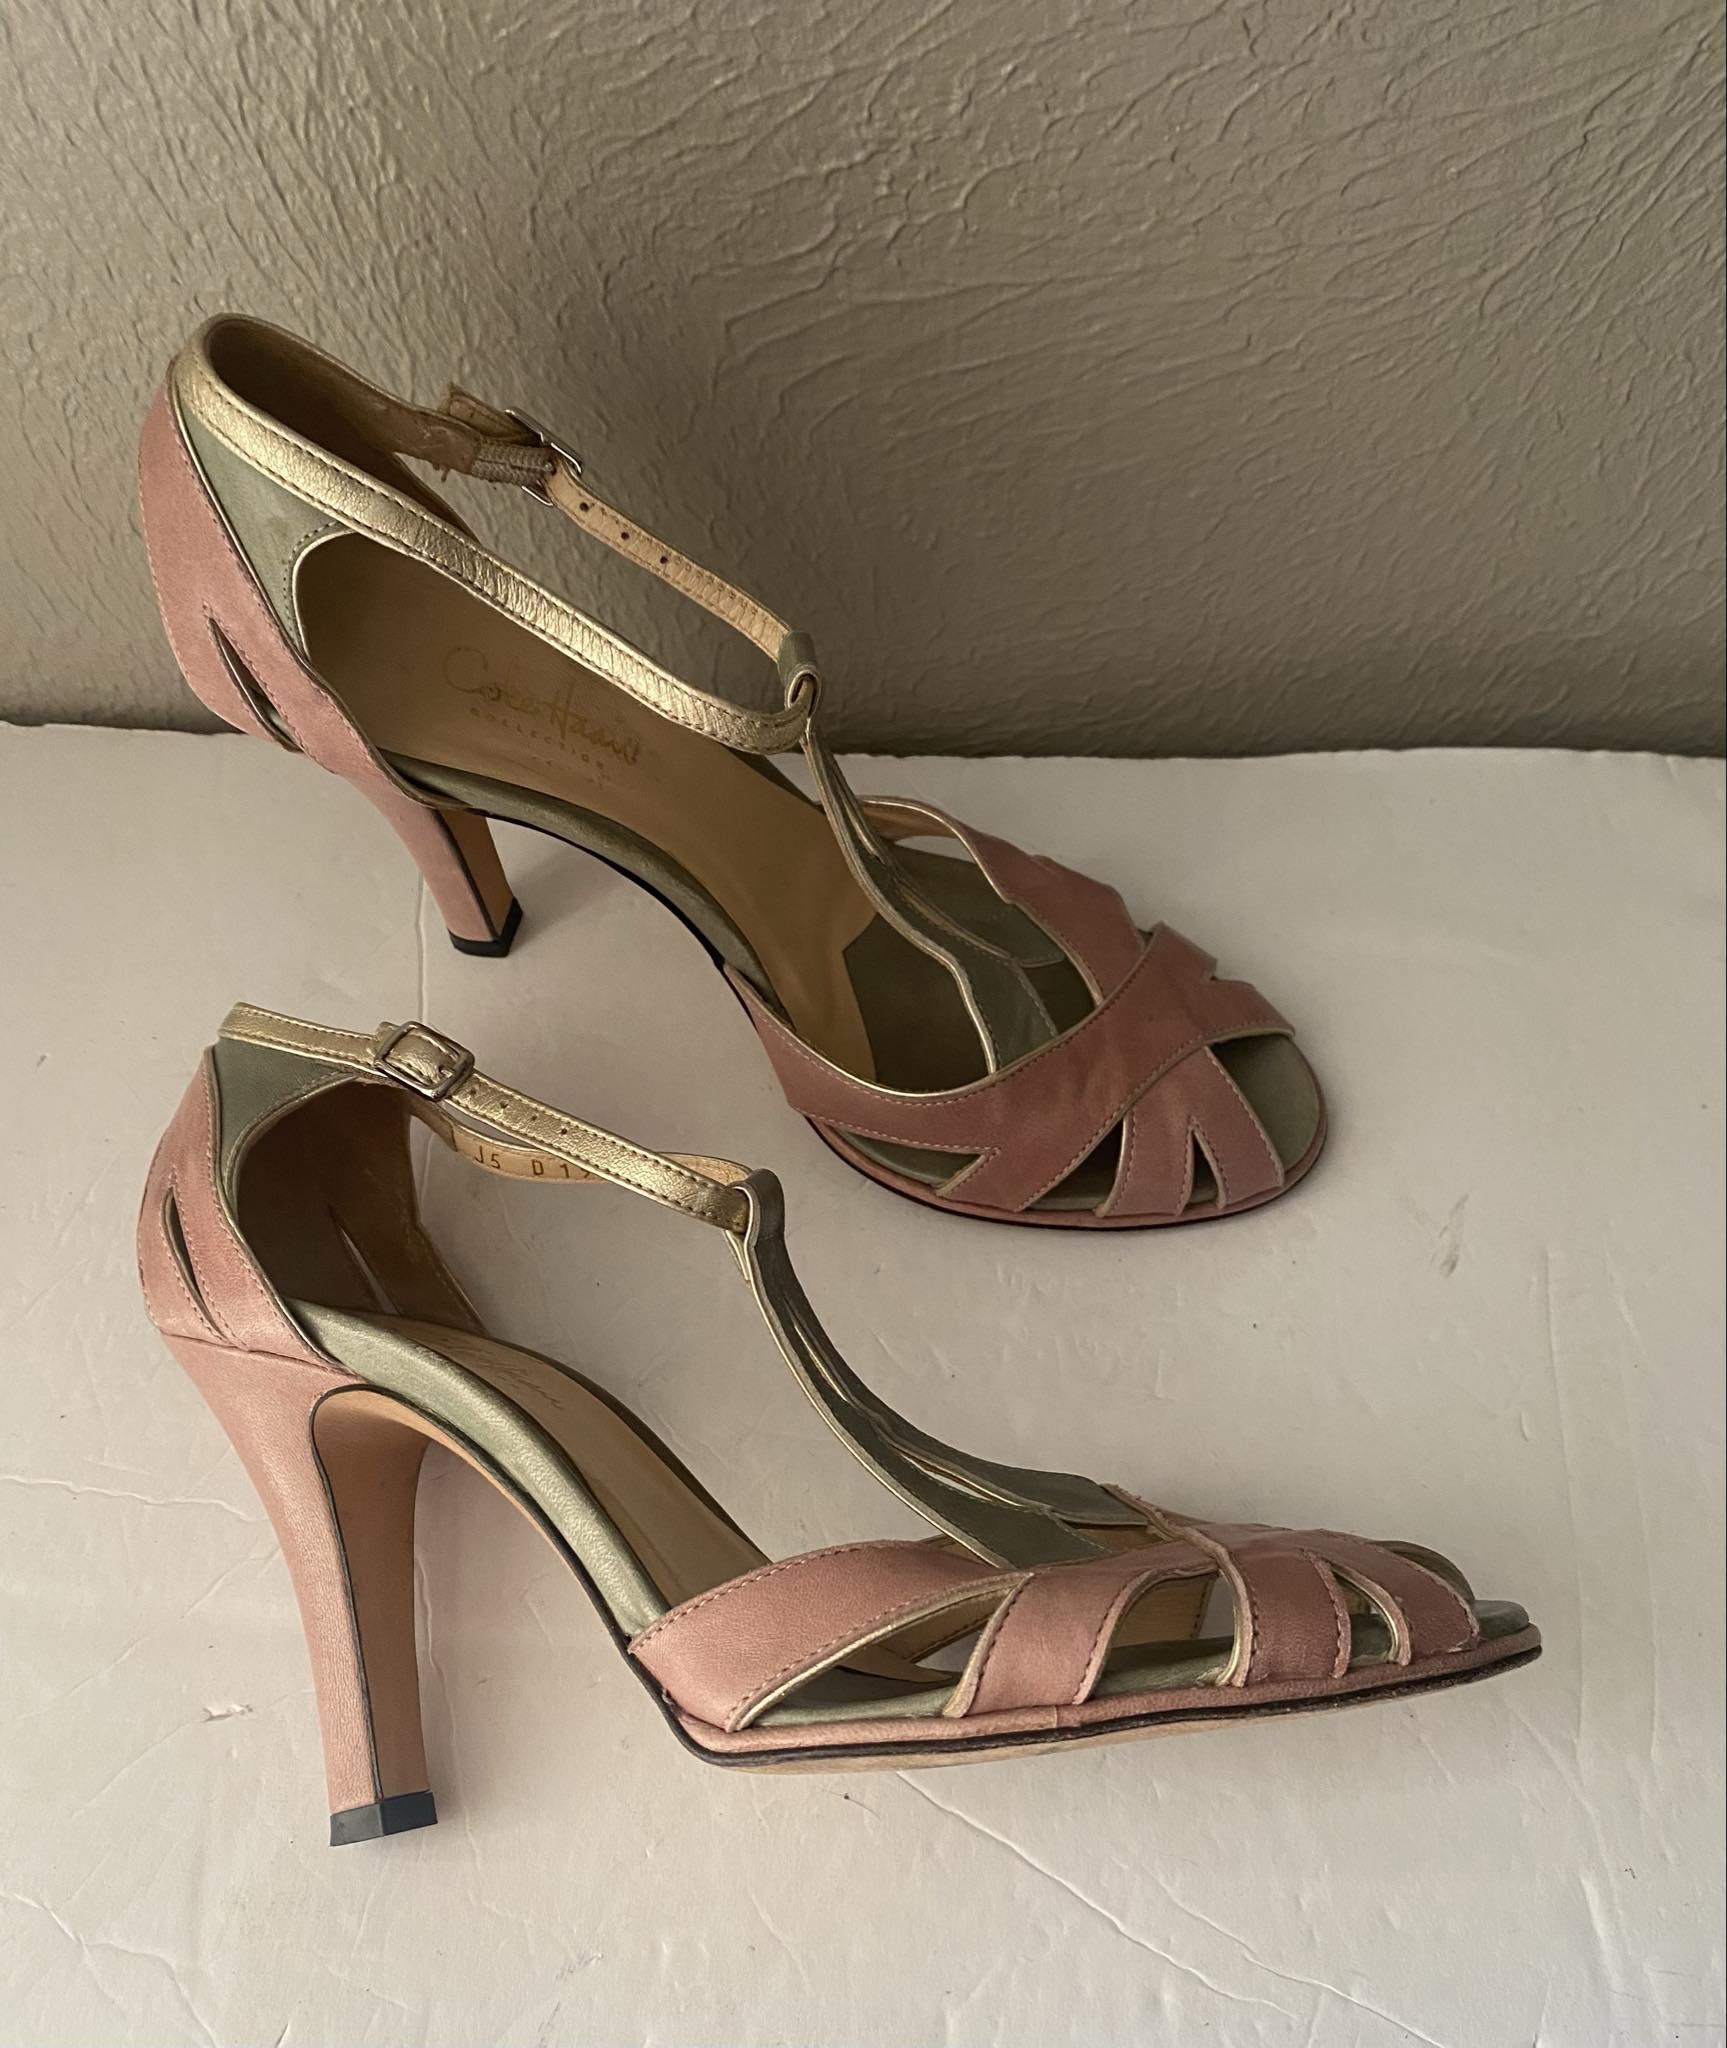 Cole Haan leather Pumps Italy Heels Pink/green Size 7.5